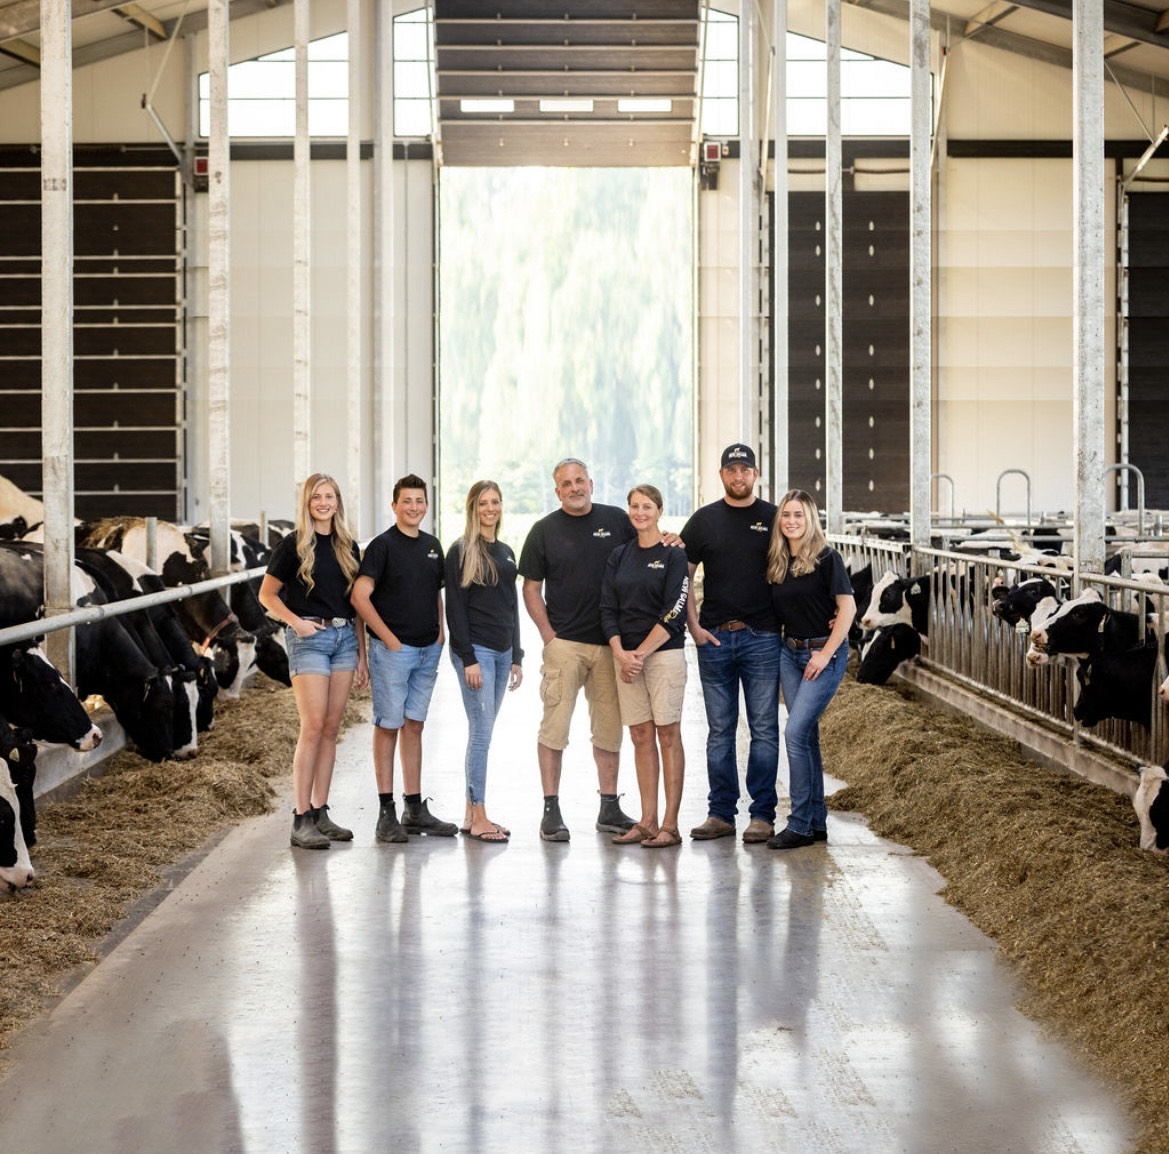 Family-owned and operated New Galma Dairy